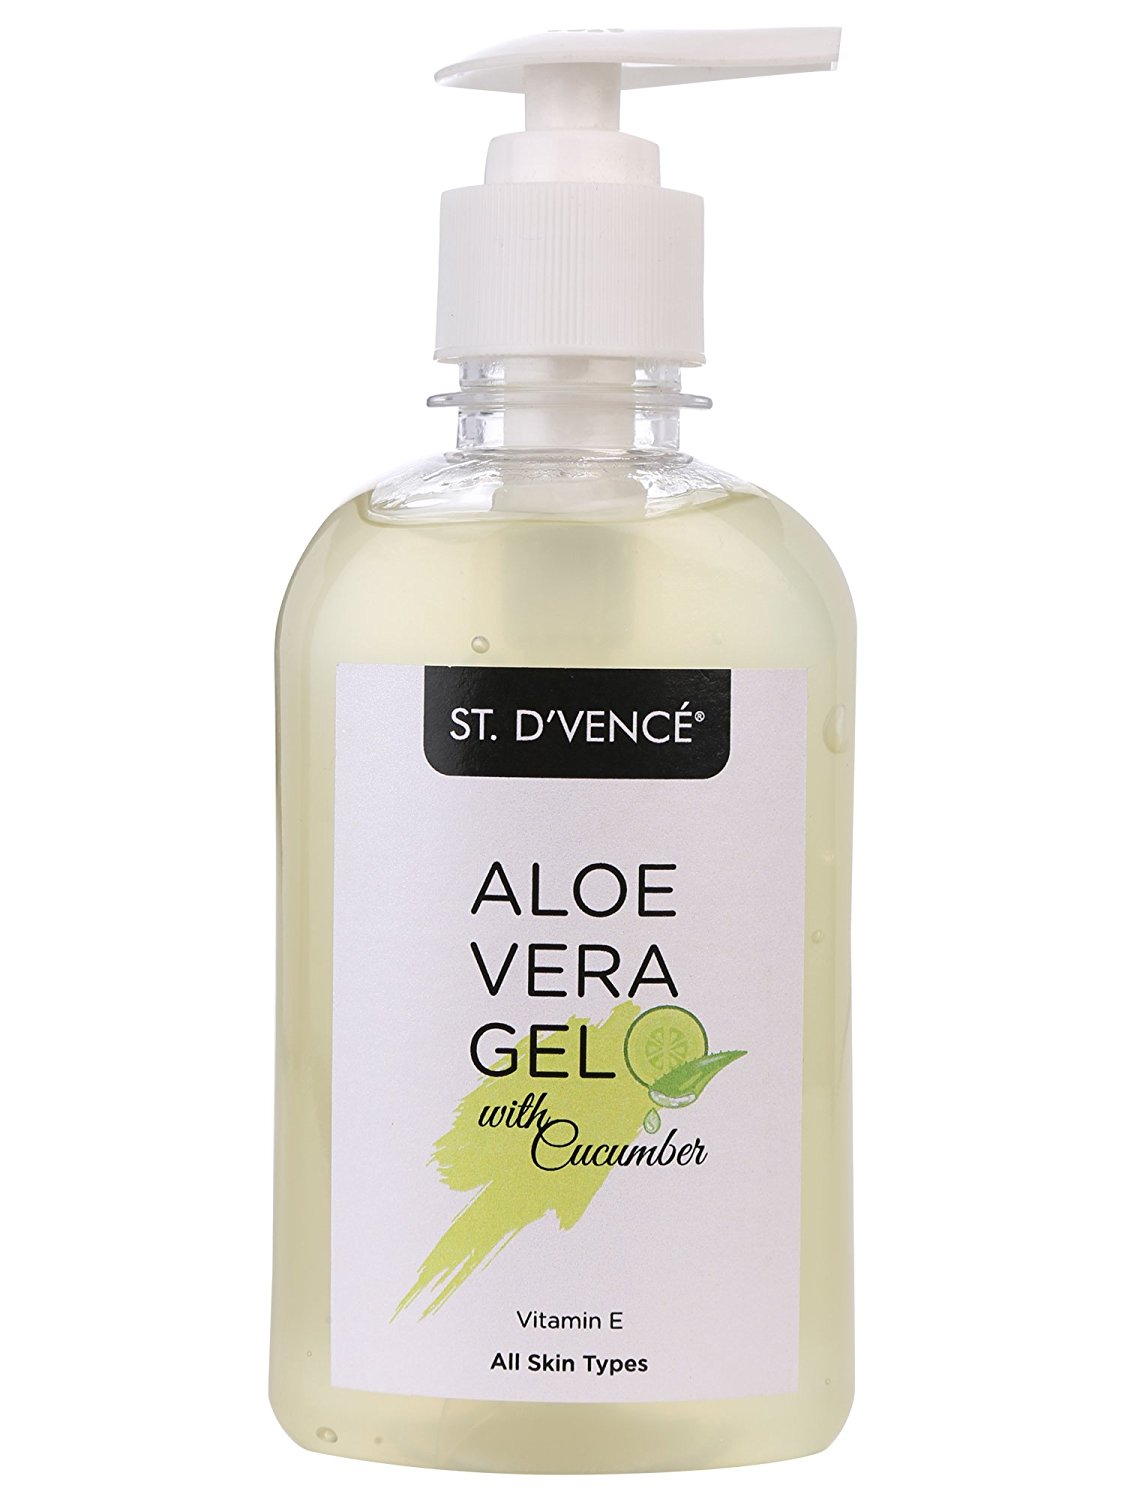 Amazon: Buy ST. D’VENCÉ Aloe Vera & Cucumber Gel 250 ml at Rs 99 only